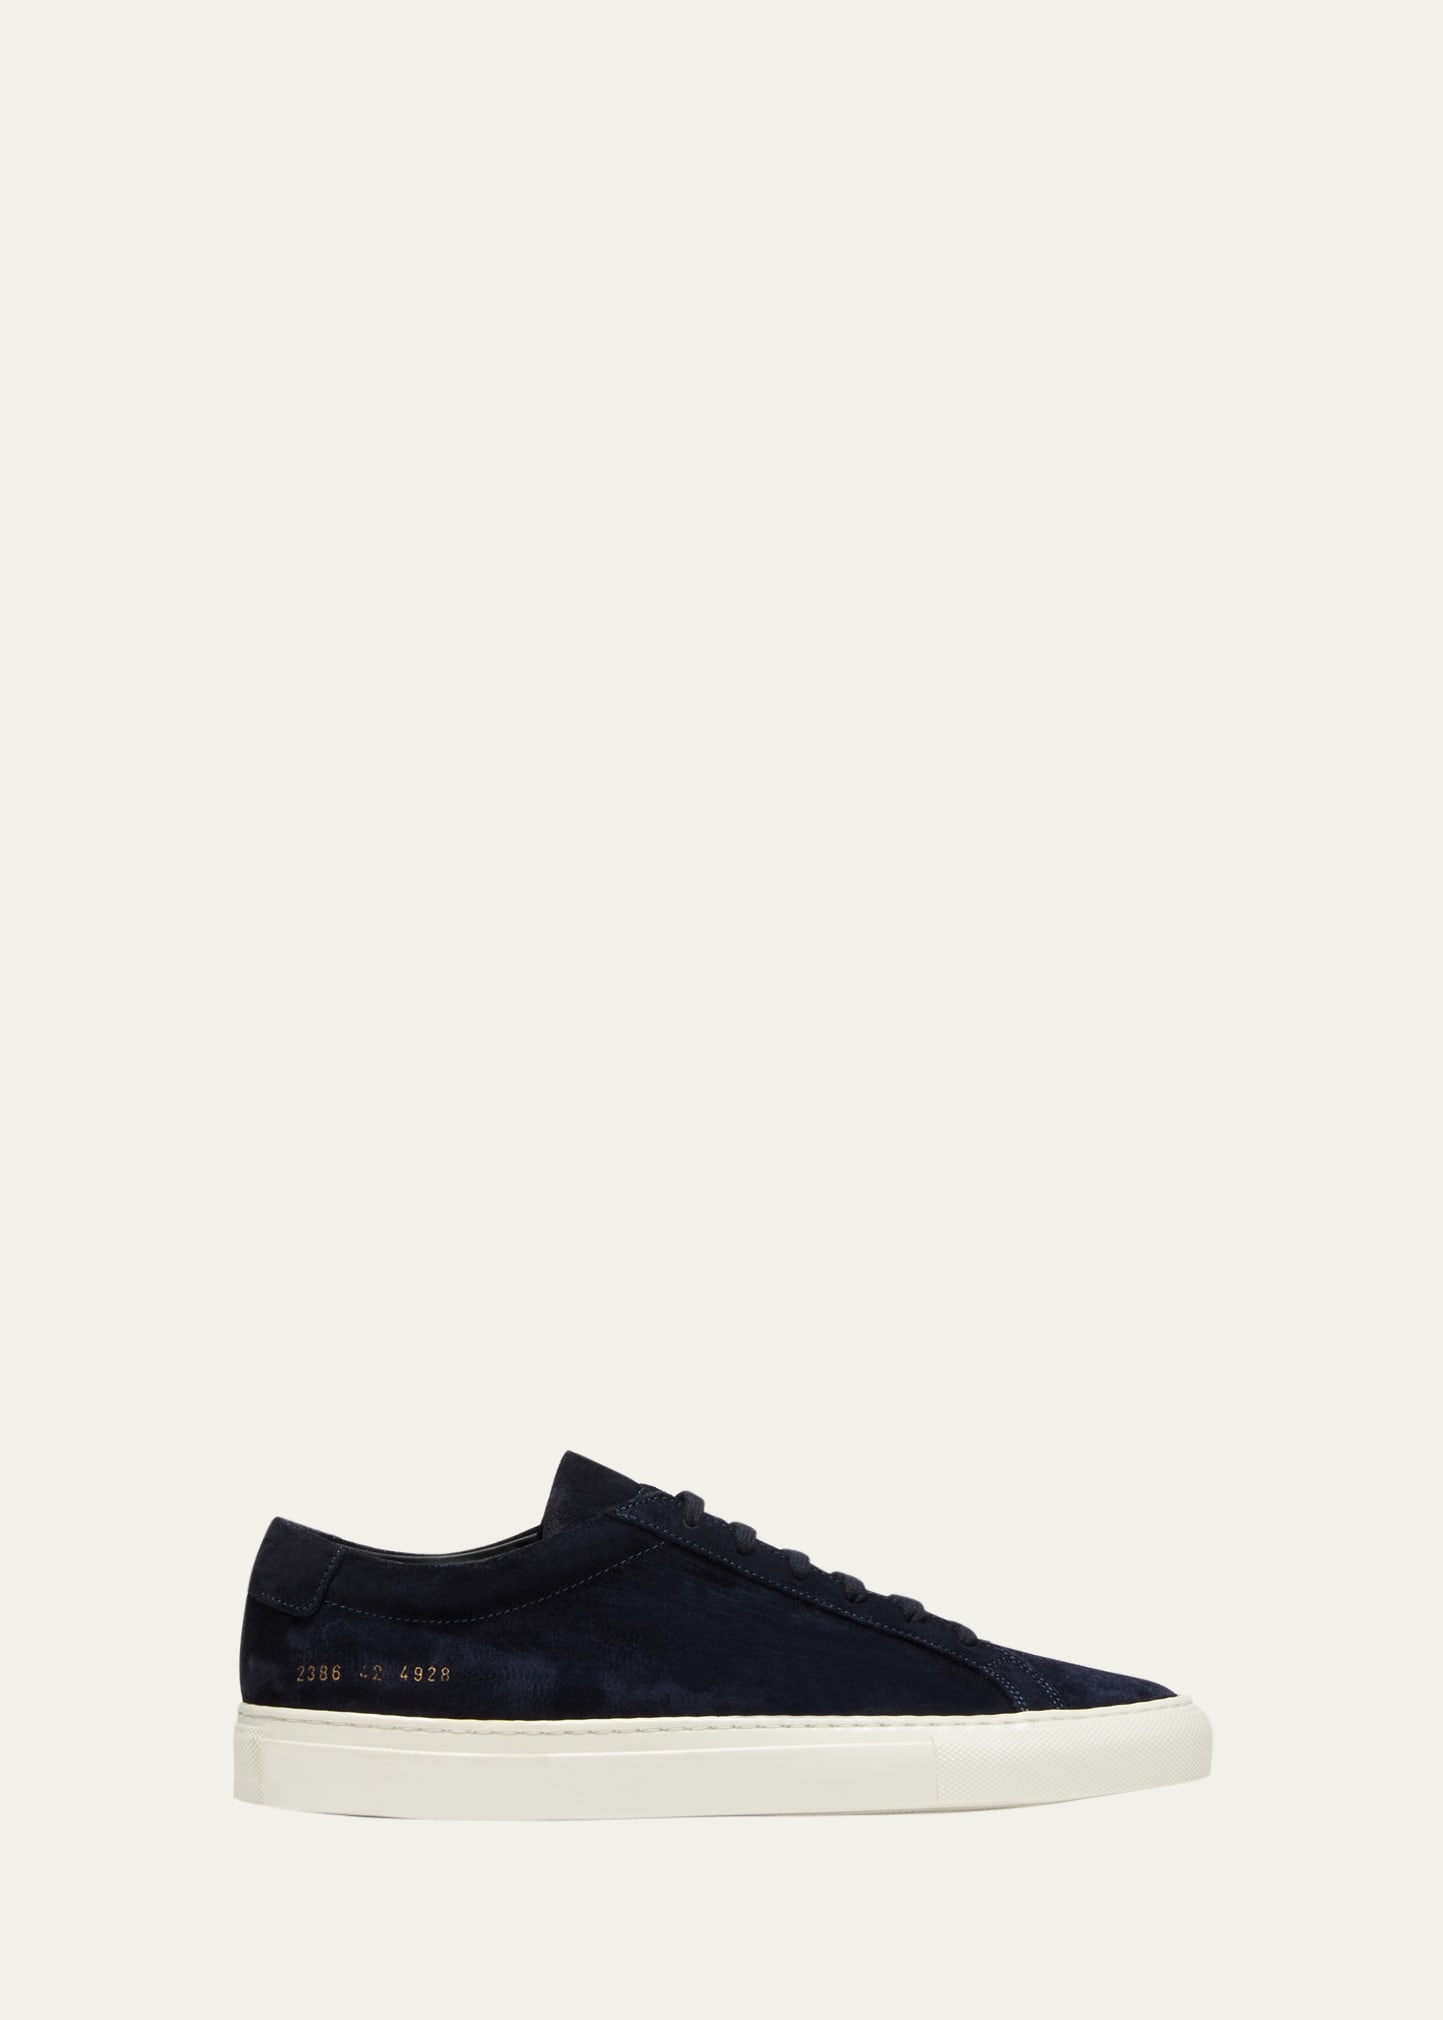 COMMON PROJECTS MEN'S ACHILLES WAXED SUEDE LOW TOP SNEAKERS